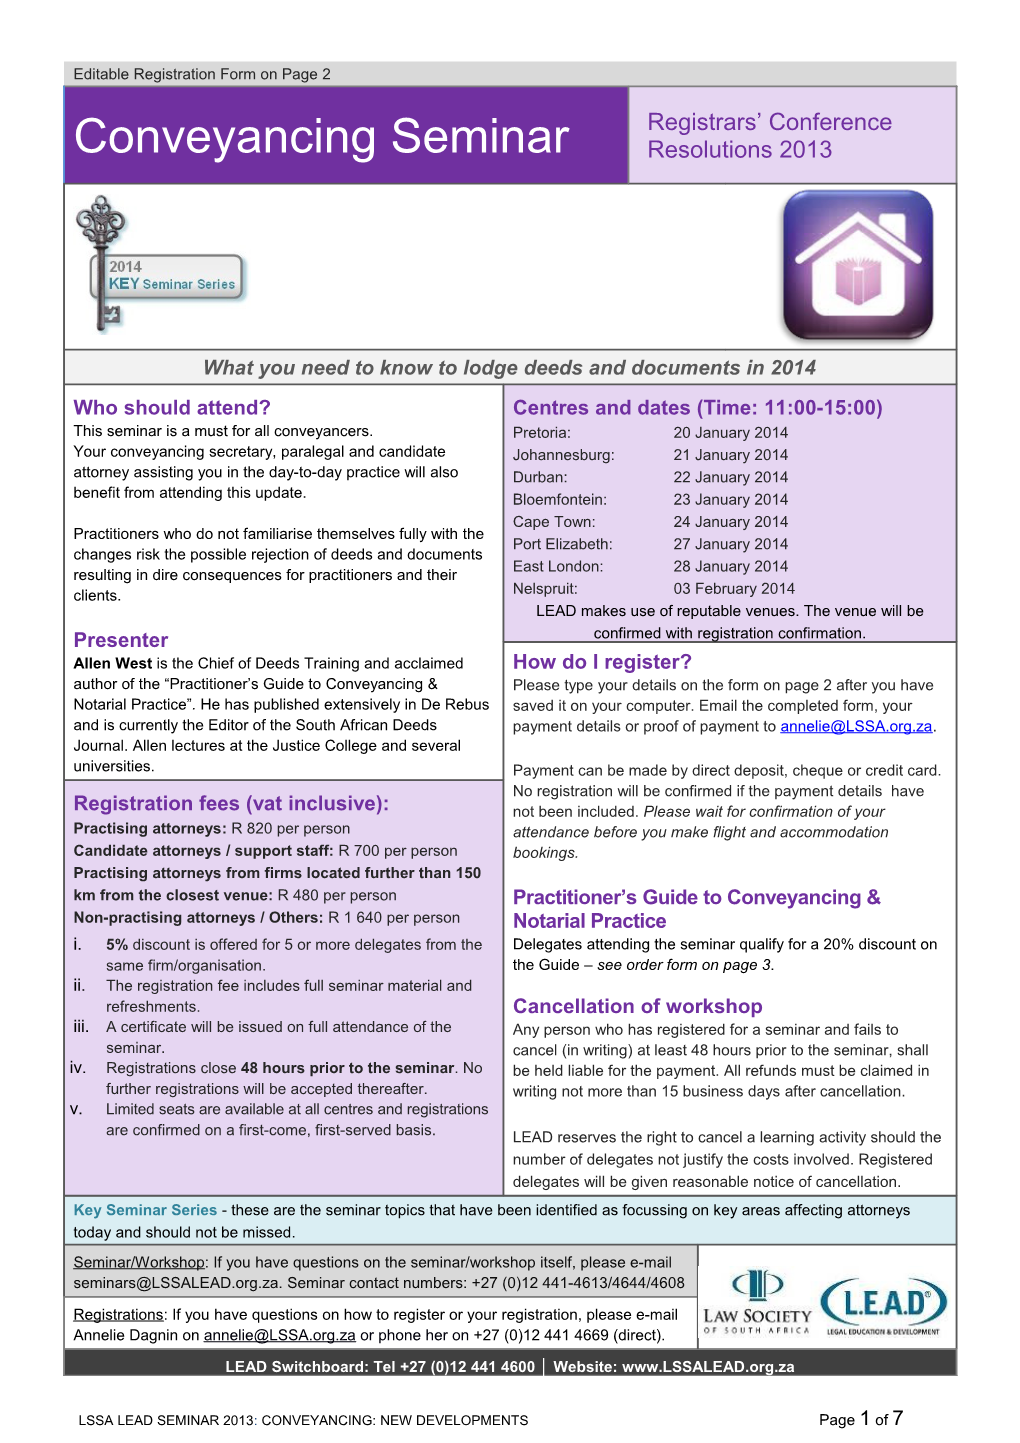 LSSA LEAD SEMINAR 2013: CONVEYANCING: NEW DEVELOPMENTS Page 2 of 4